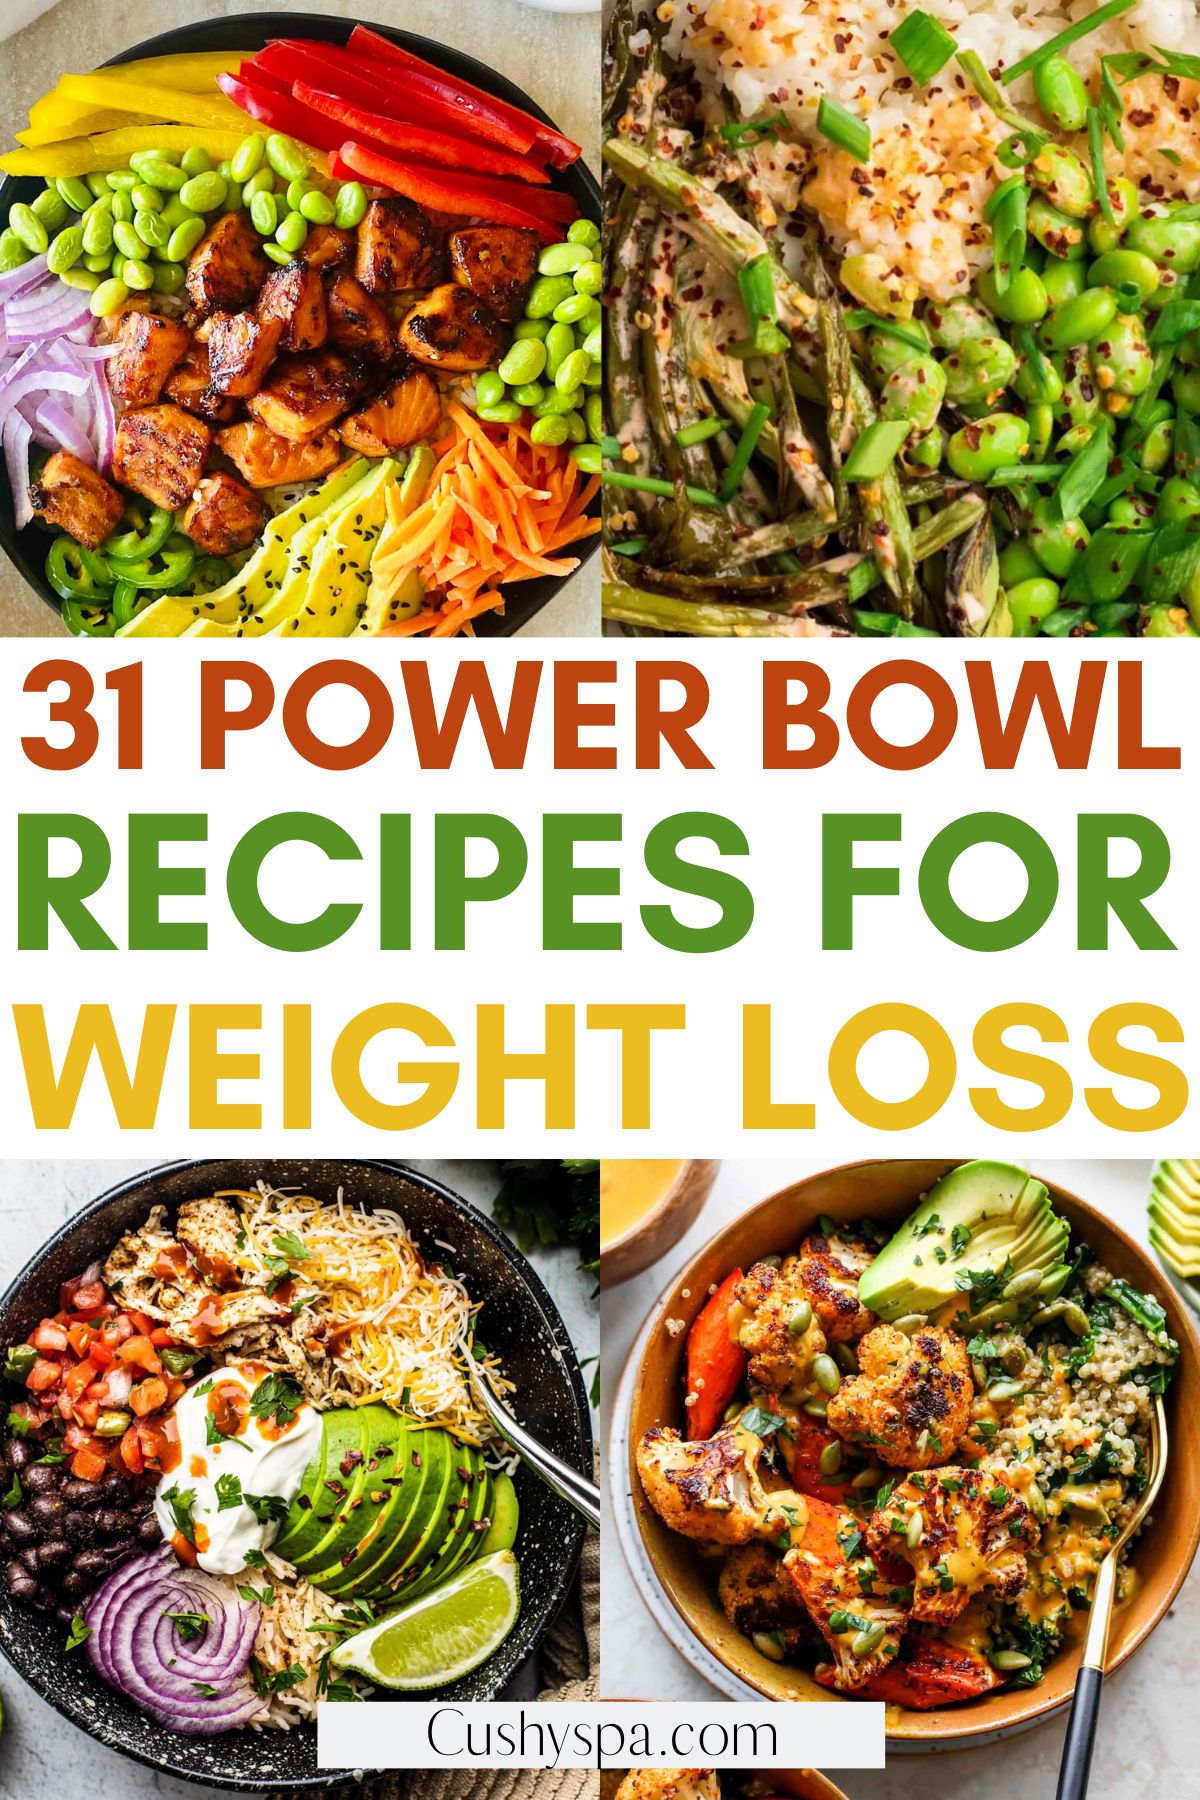 Power Bowl Recipes for Weight Loss